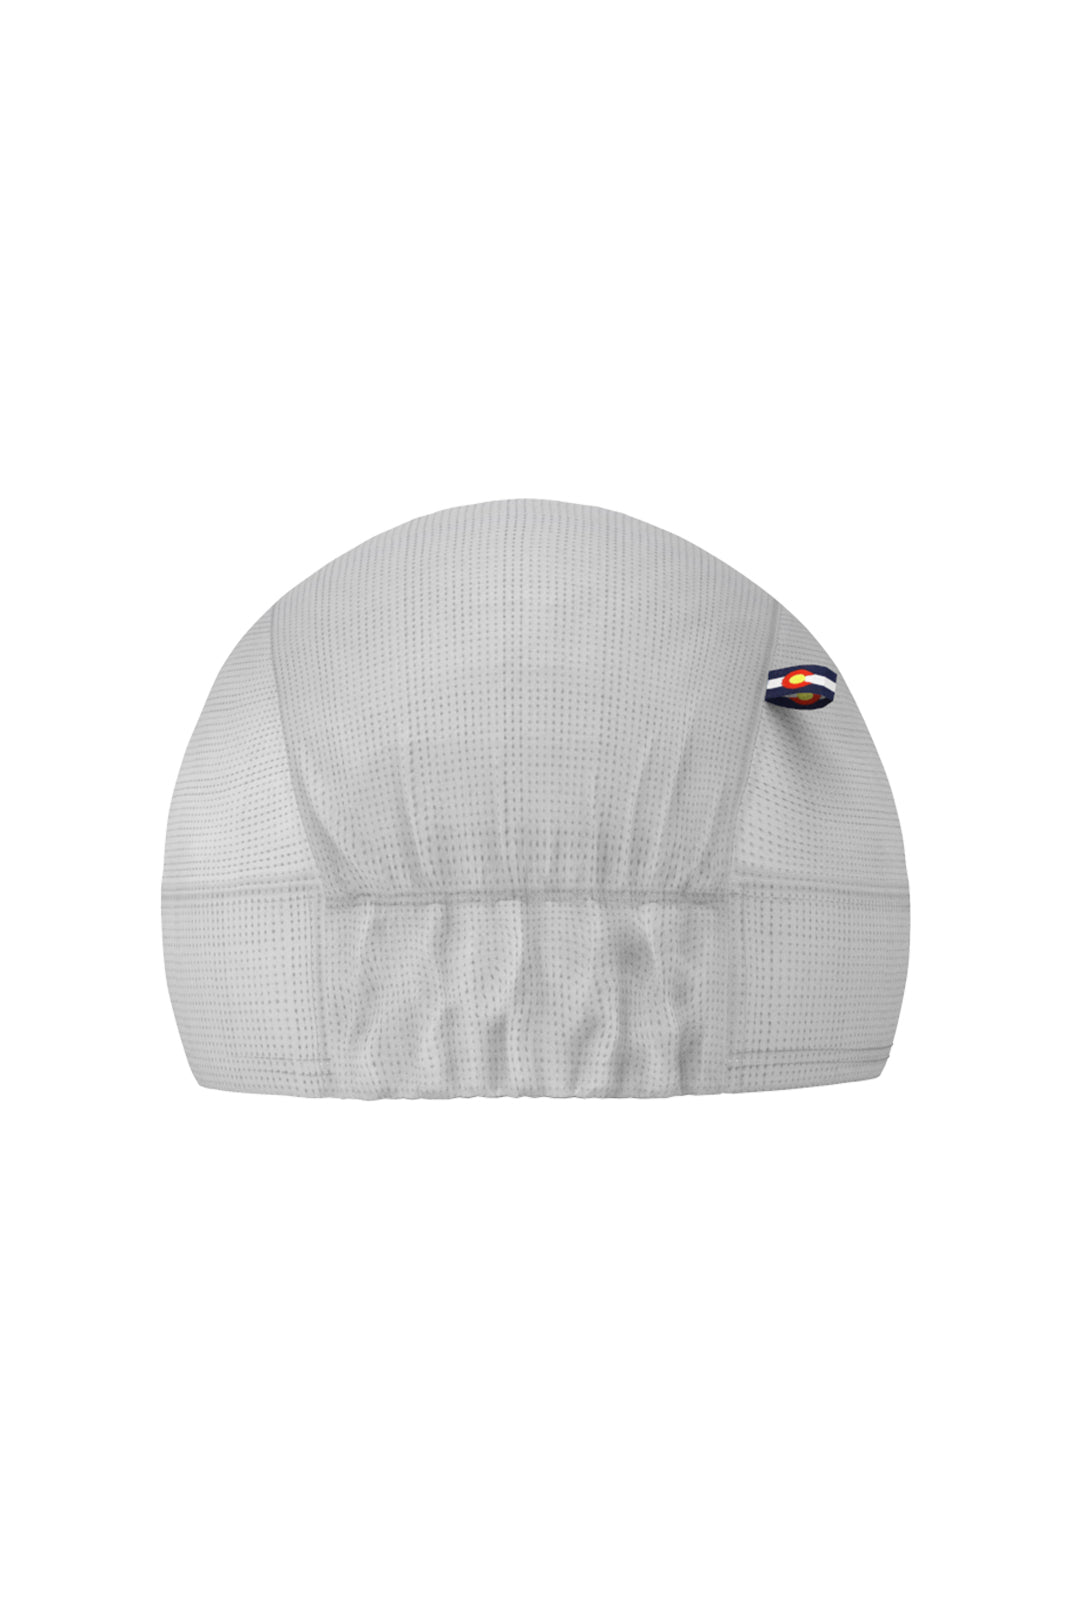 White Skull Cycling Cap - Back View